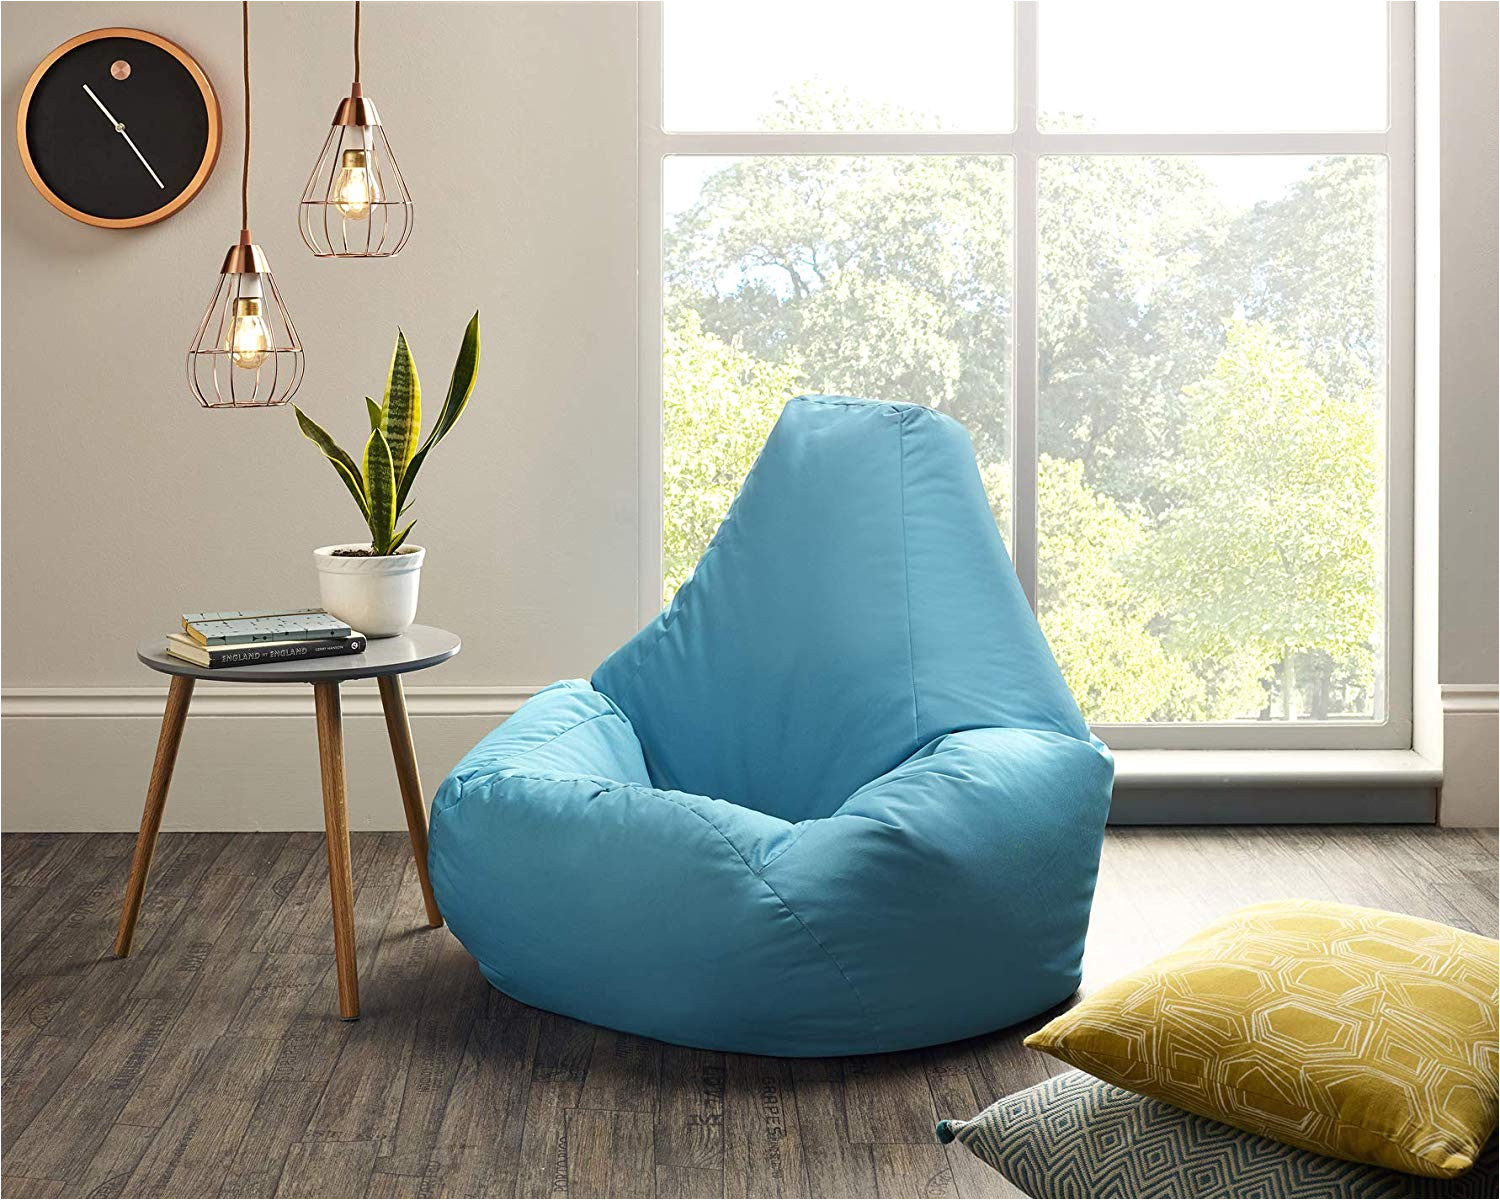 xx l aqua highback beanbag chair water resistant bean bags for indoor and outdoor use great for gaming chair and garden chair amazon co uk garden